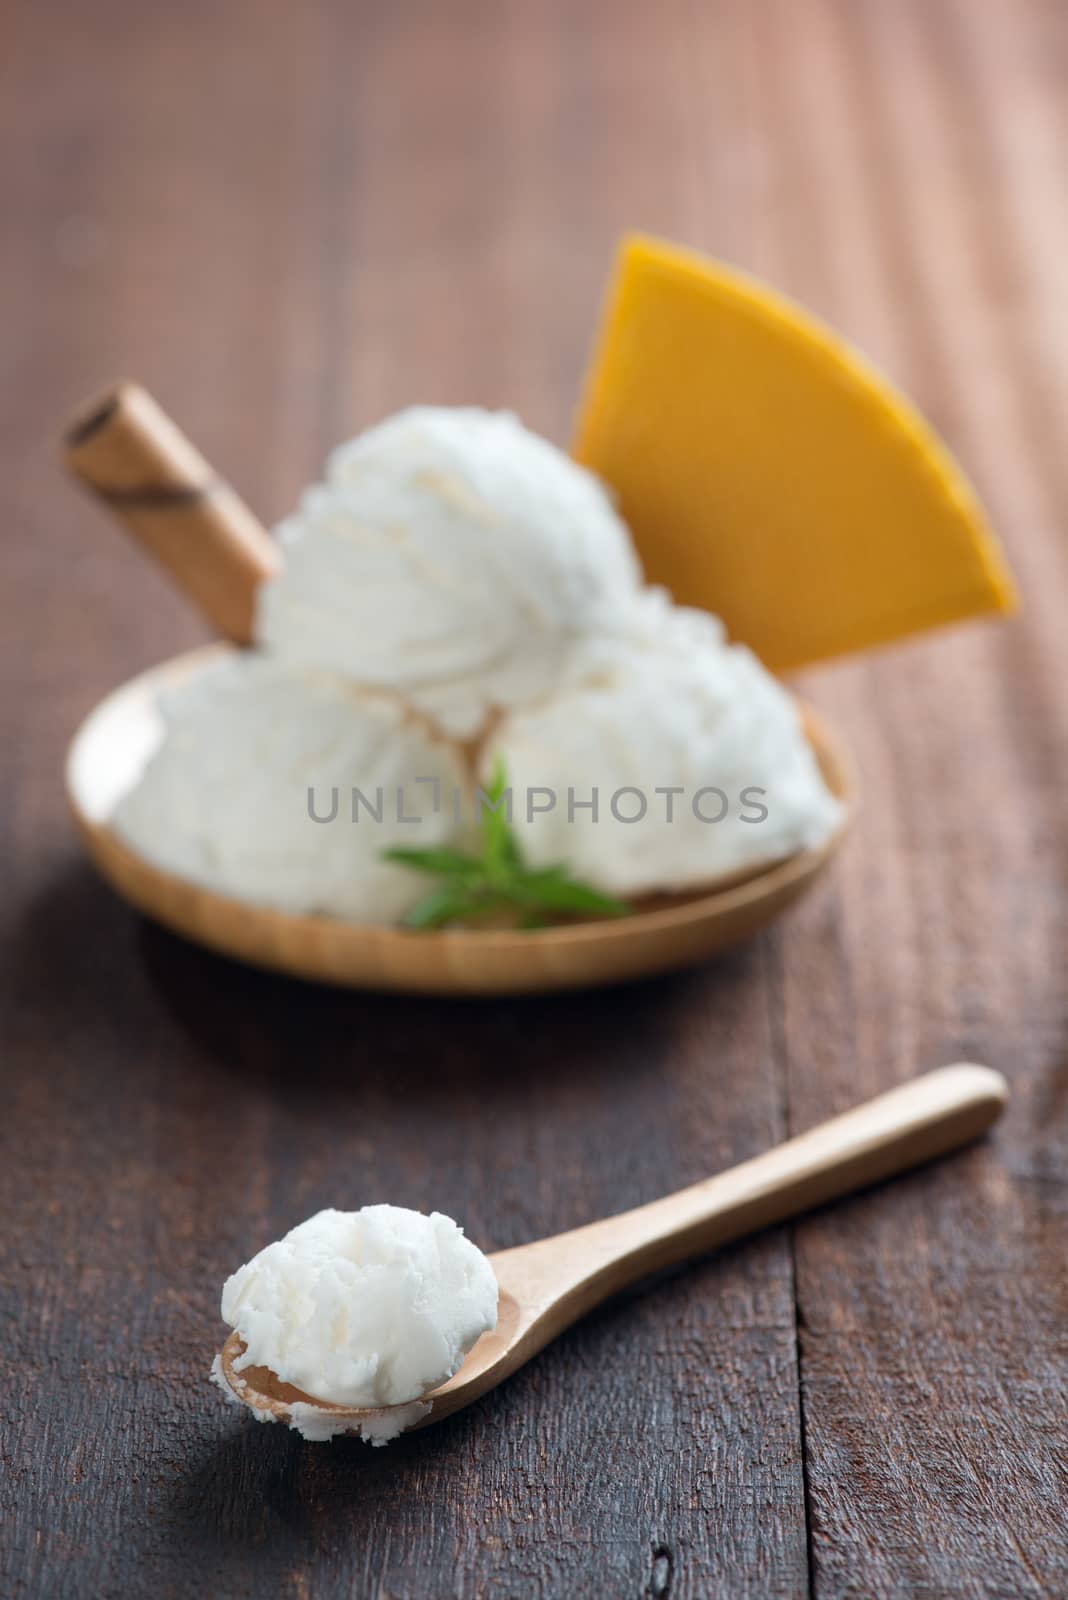 Scoop vanilla ice cream with waffle on wood background. Focus on front spoon.